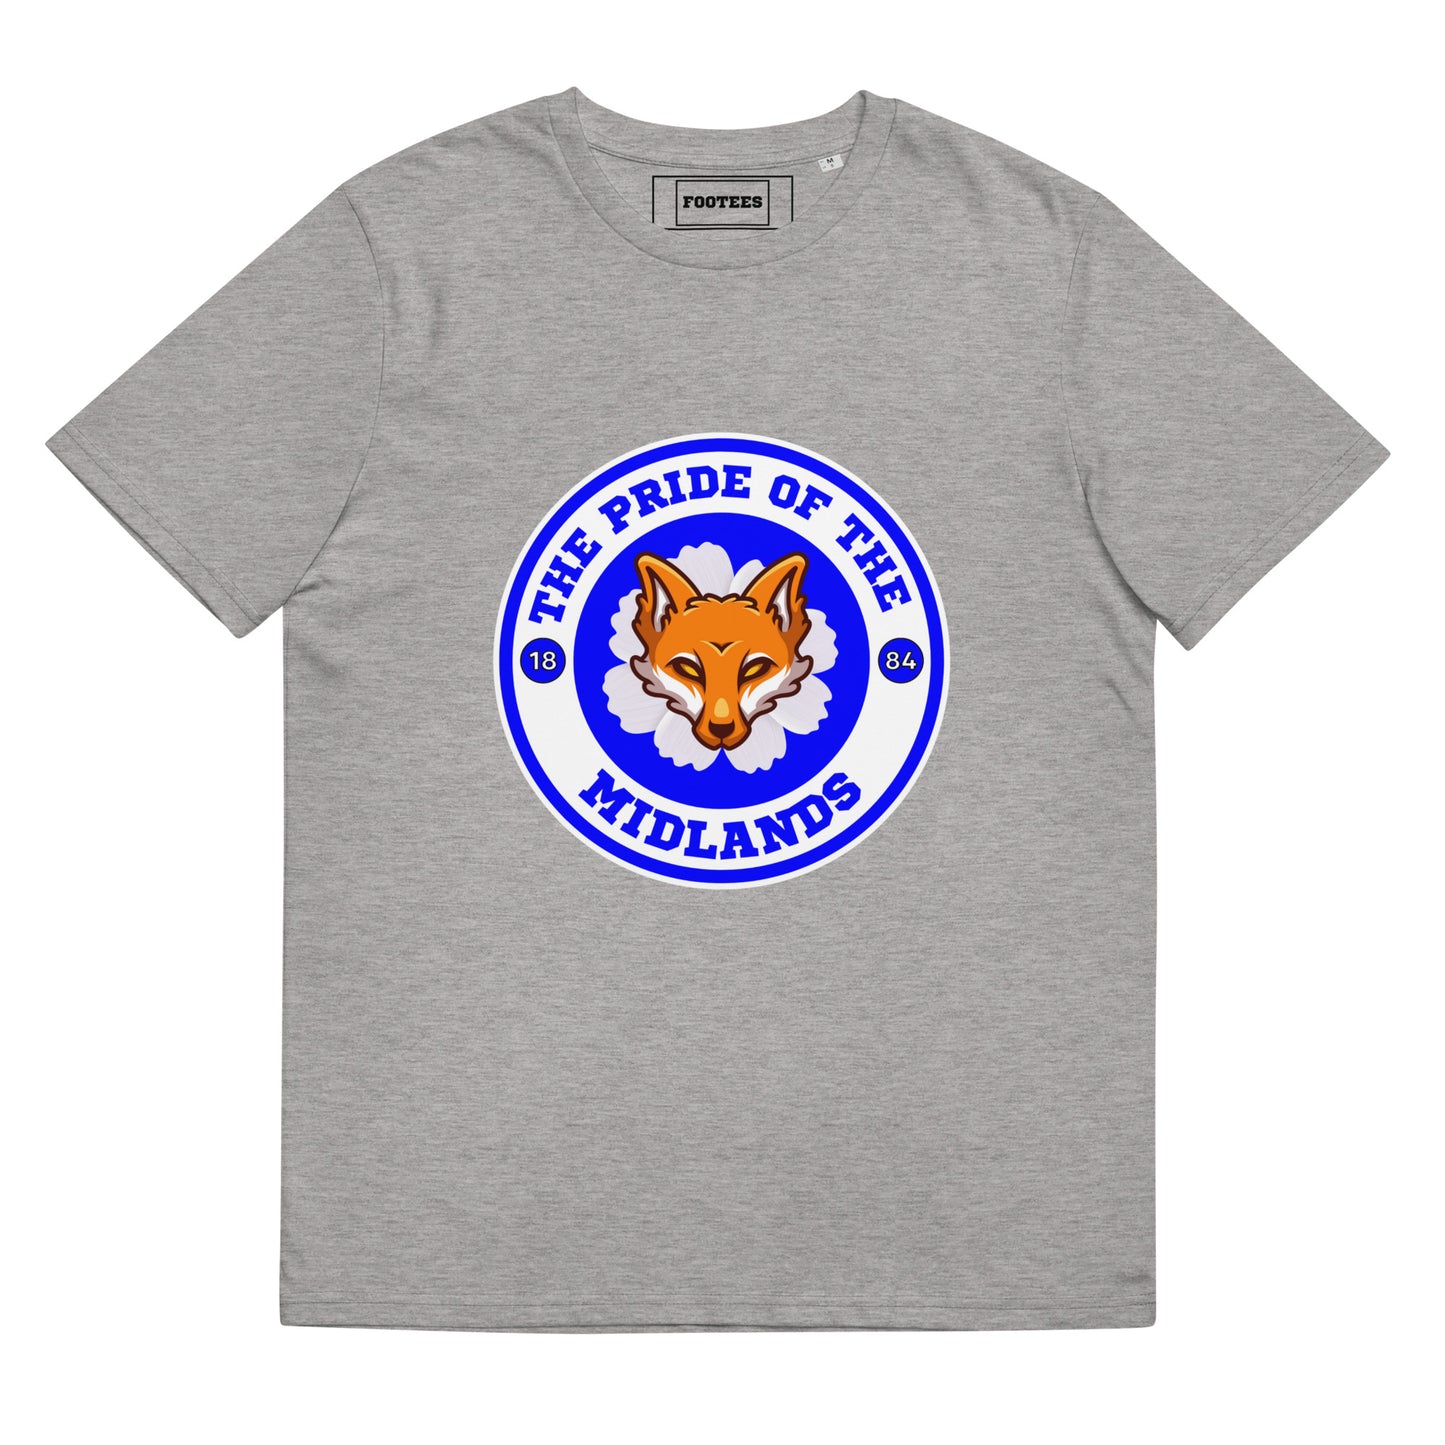 The Pride of the Midlands LCFC Tee